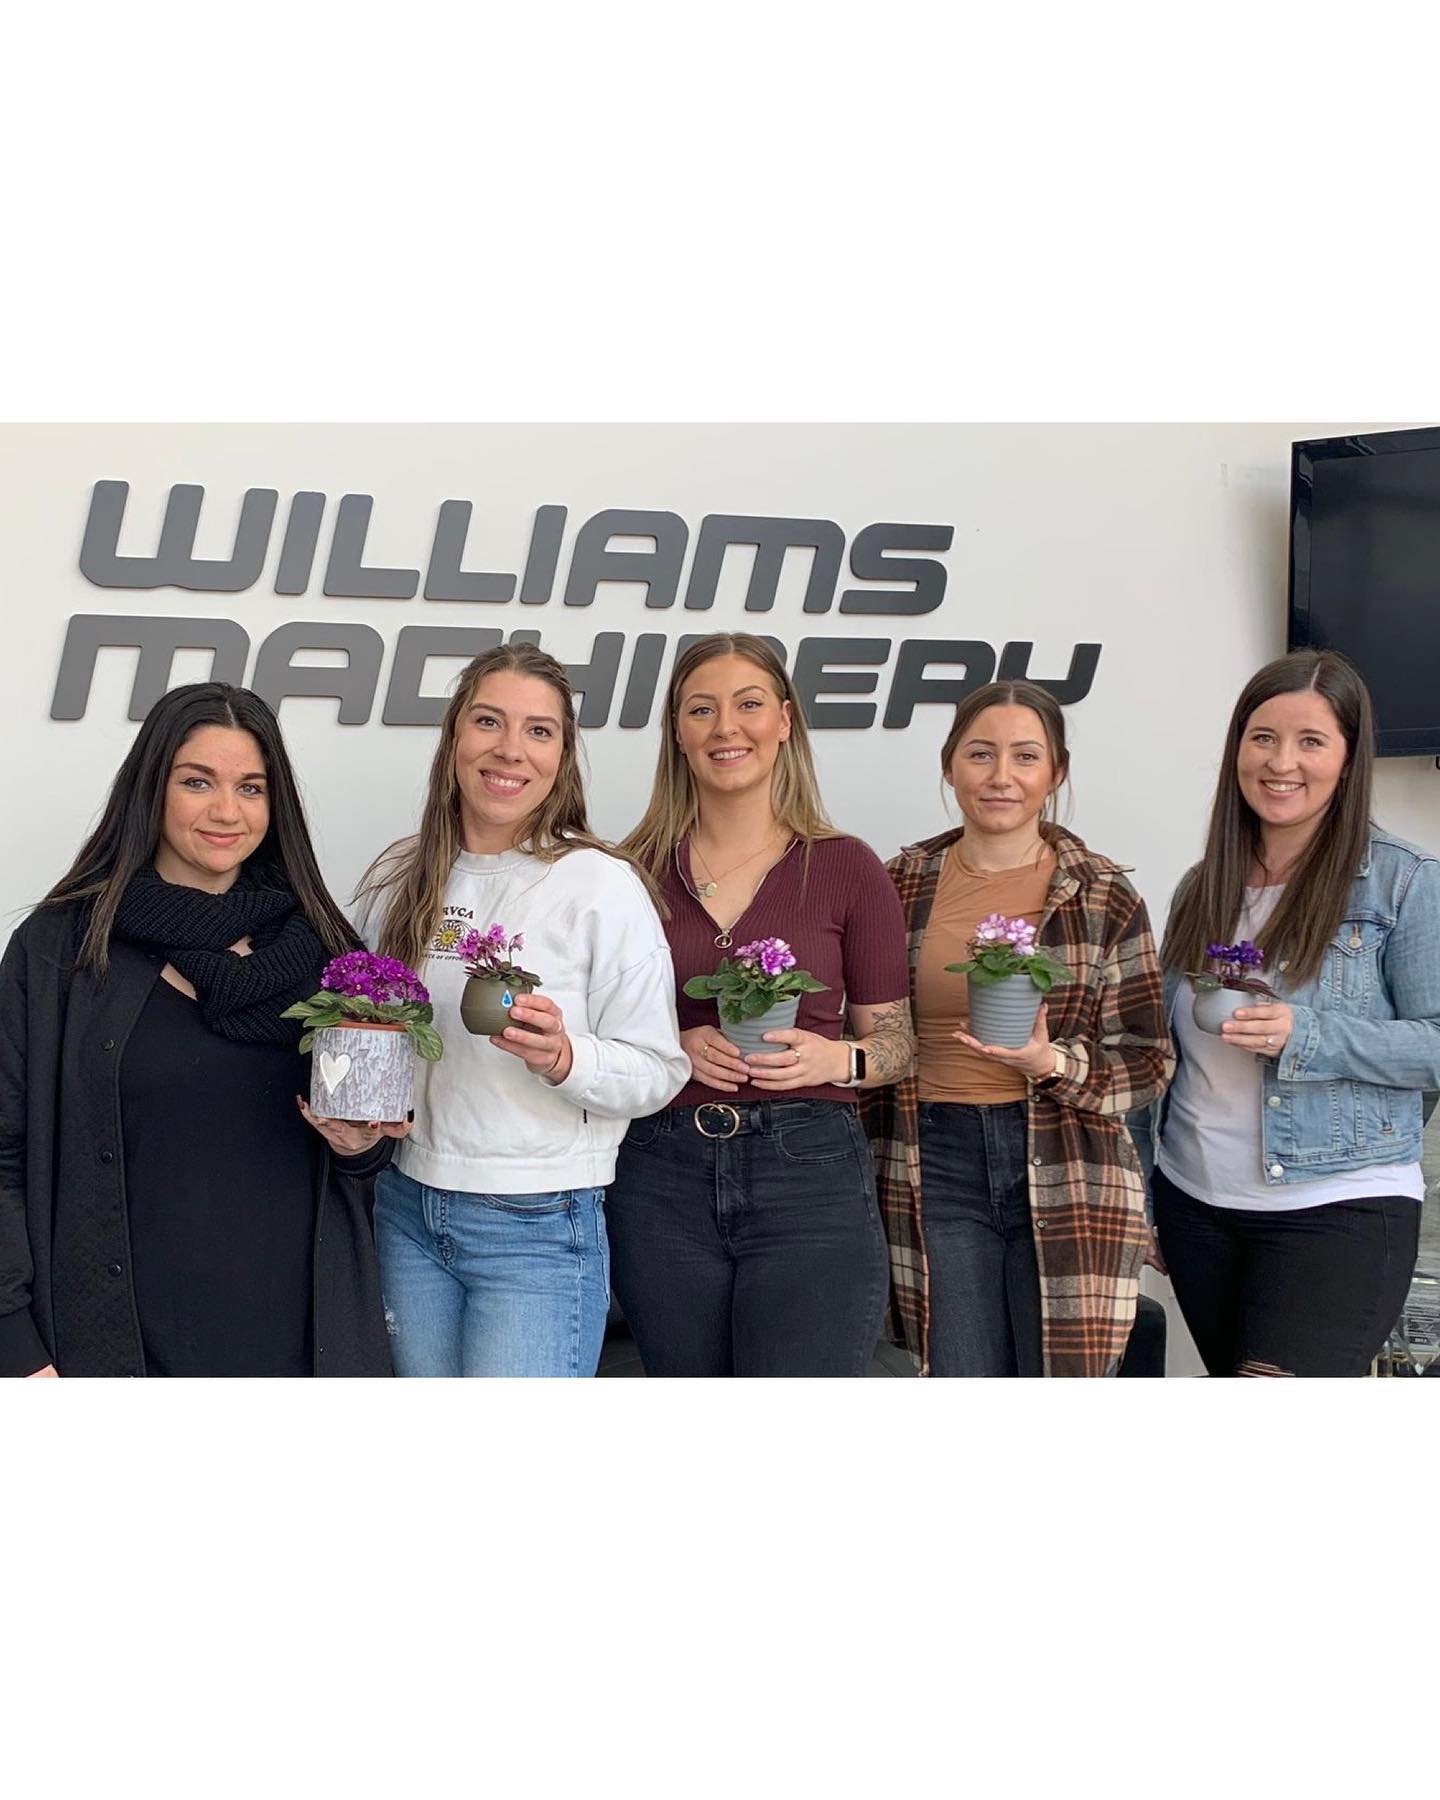 Today we celebrated International Women's Day with gifting purple potted flowers to our Wesgroup Equipment and @williams_mach Surrey team. Thank you ladies for all the incredible work you do to keep our business growing and our valued customers up and running!

#HappyInternationalWomensDay #lifeatwesgroupequipment #wesgroupequipment